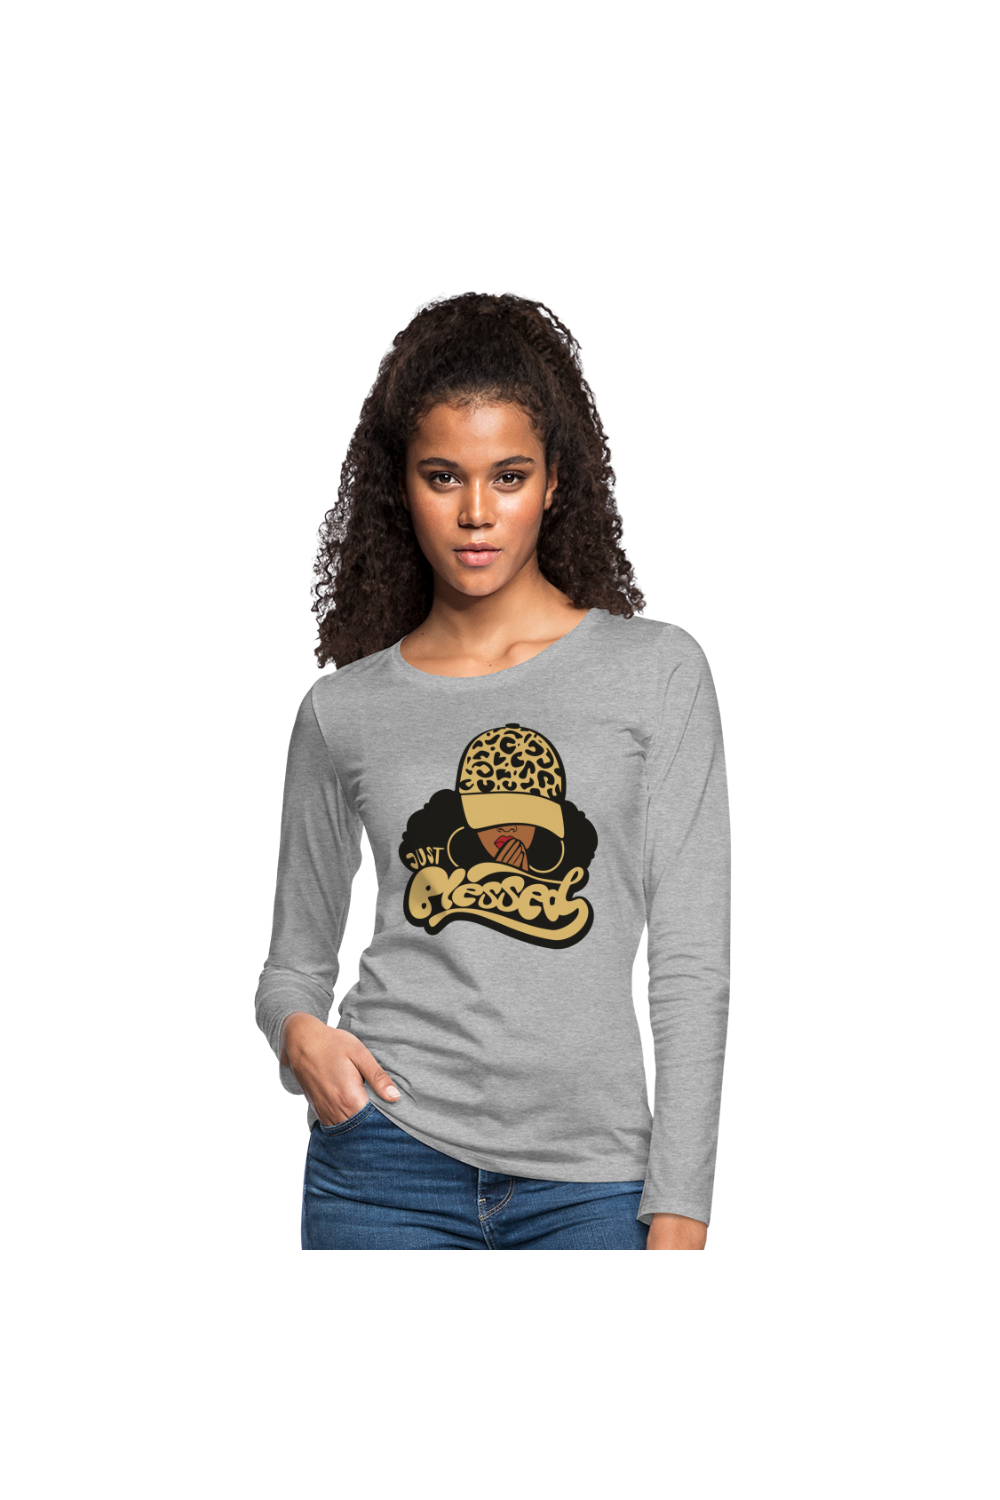 Women's Gold Just Blessed  Long Sleeve T-Shirt - heather gray